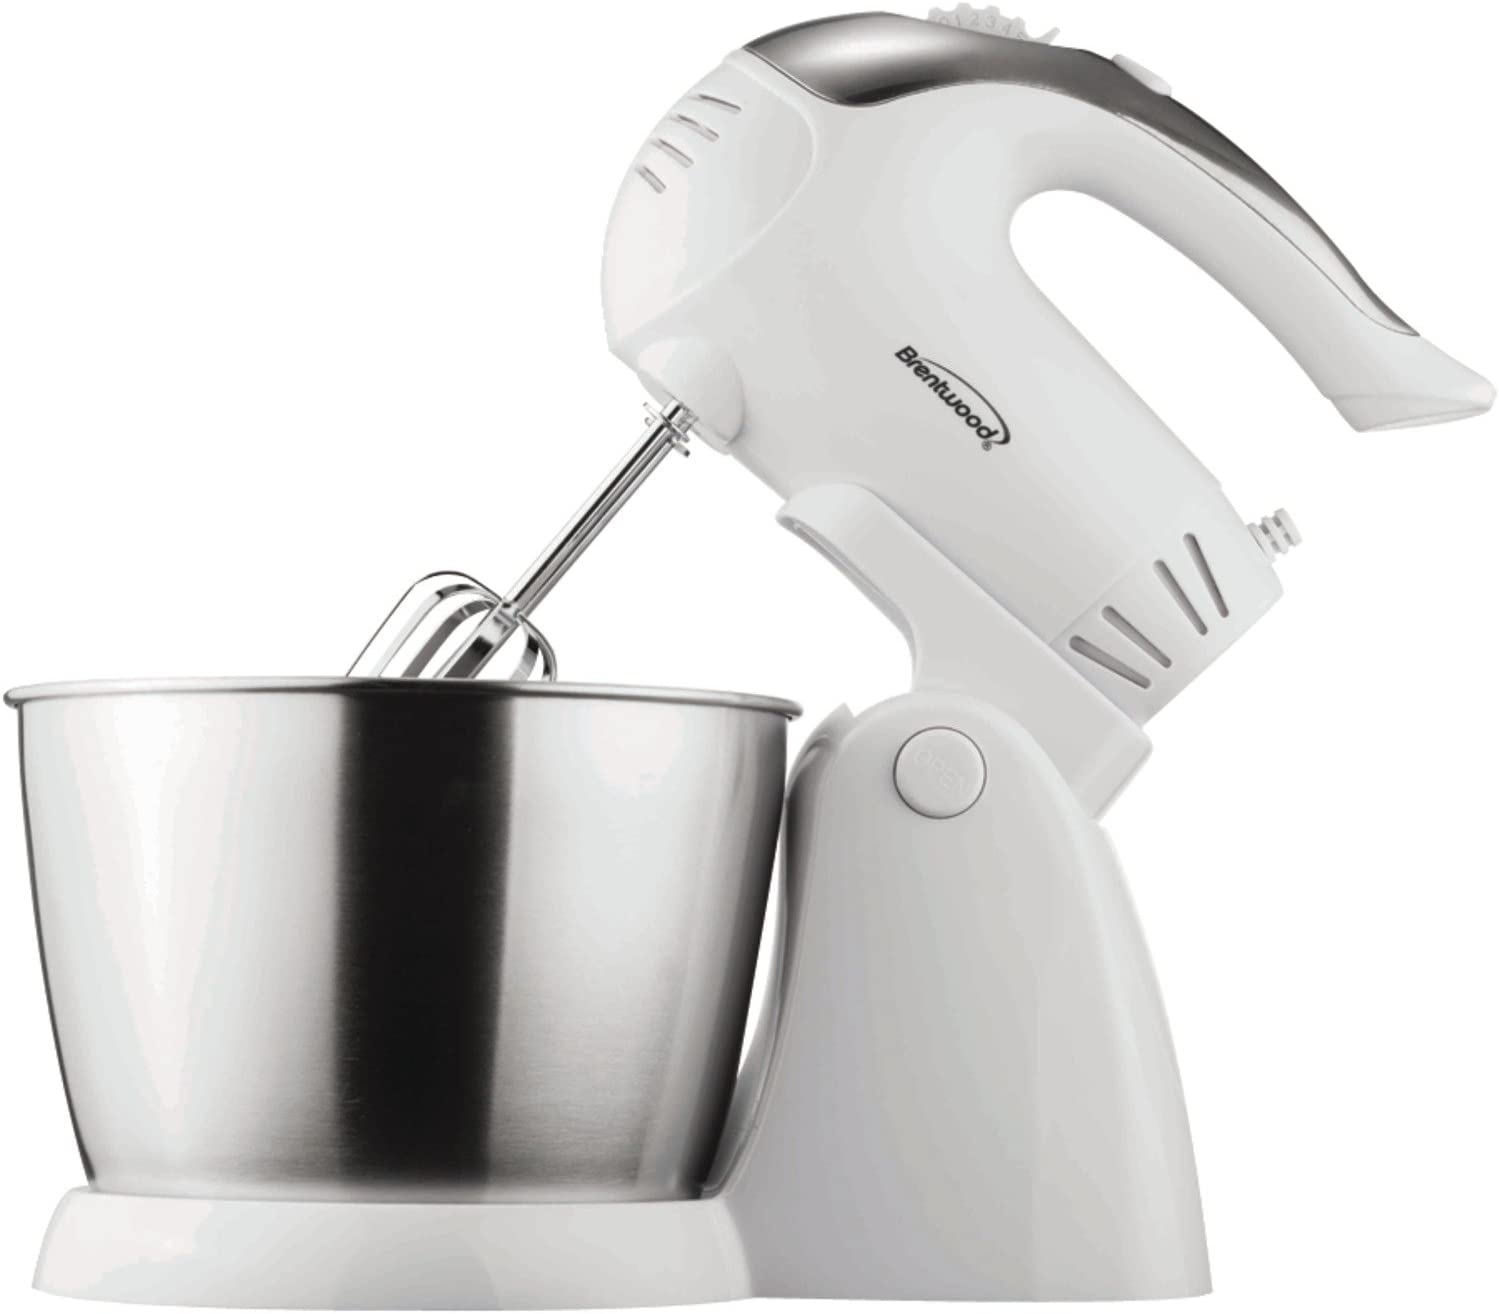 Brentwood Stand Mixer, 5-Speed + Turbo, White Import To Shop ×Product customization General Description Gallery Reviews